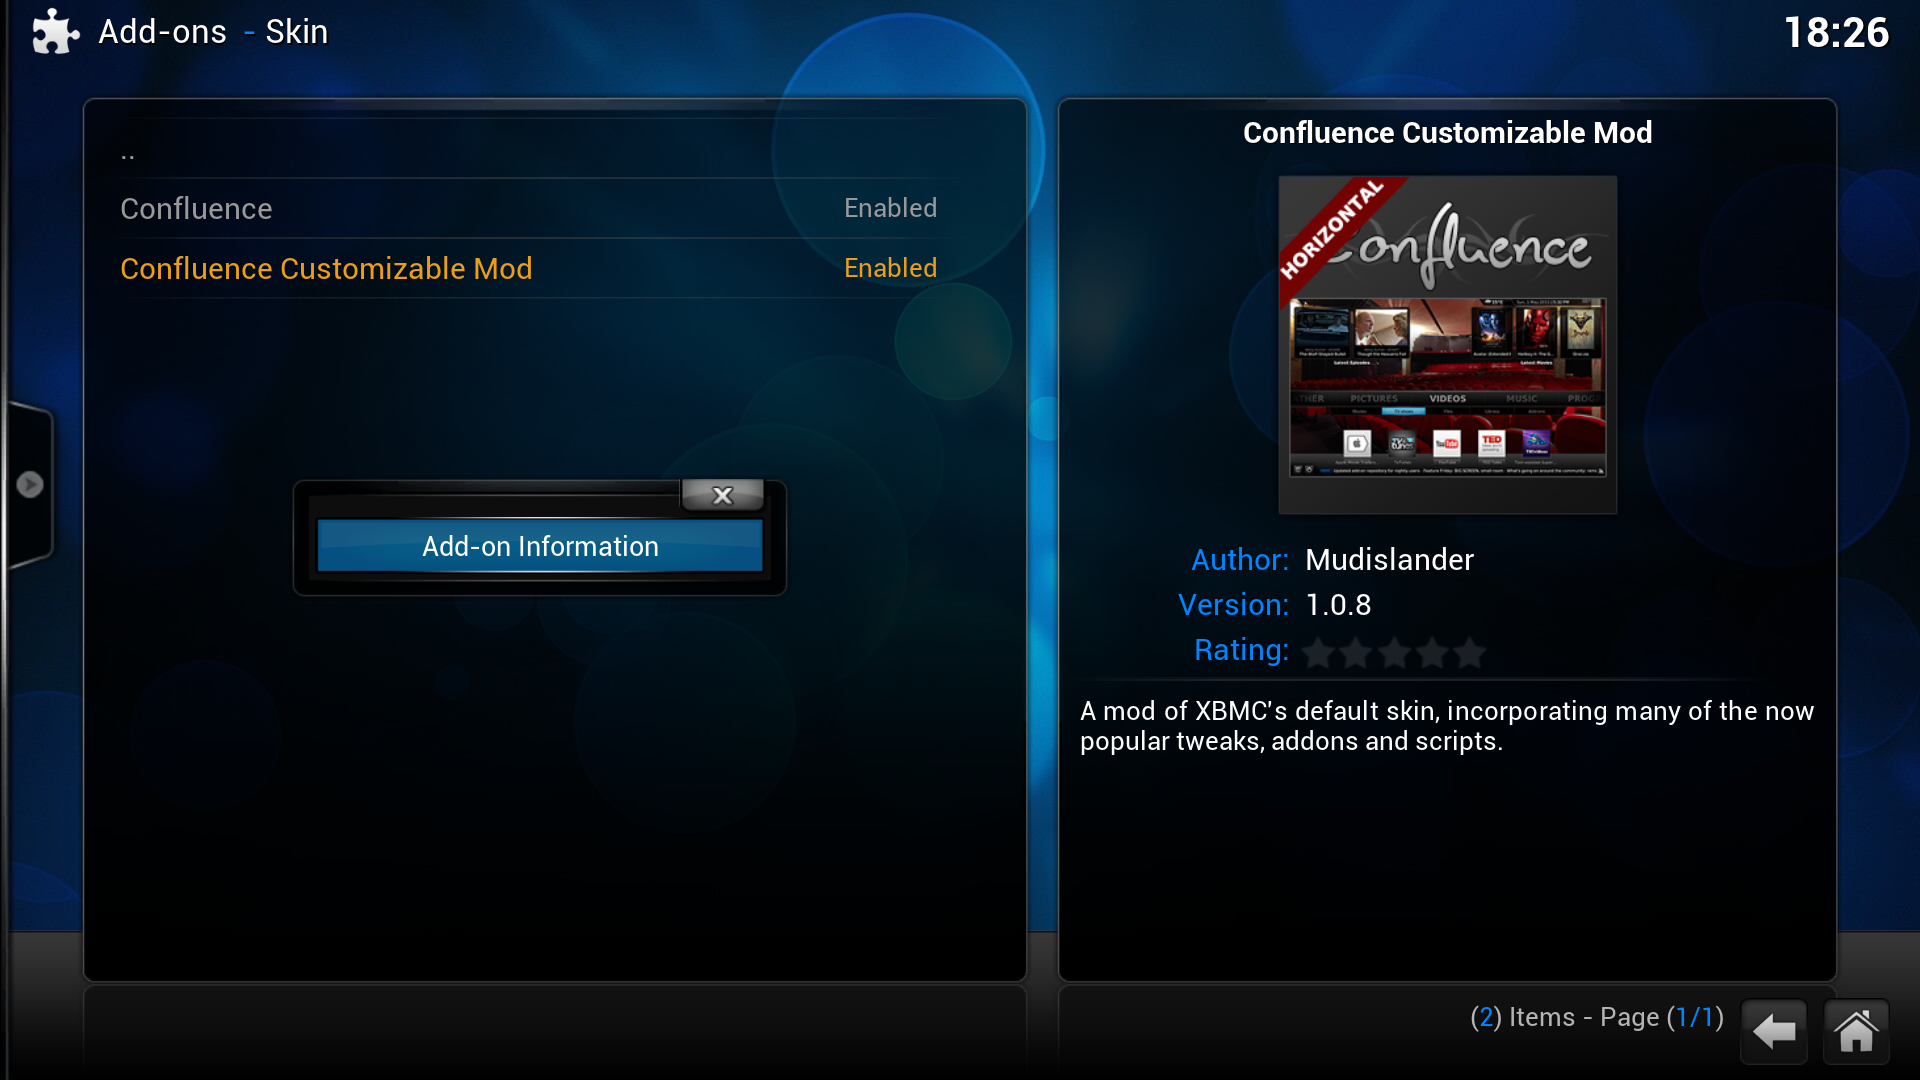 Step 2: Bring up the contextual menu and select Add-on information.